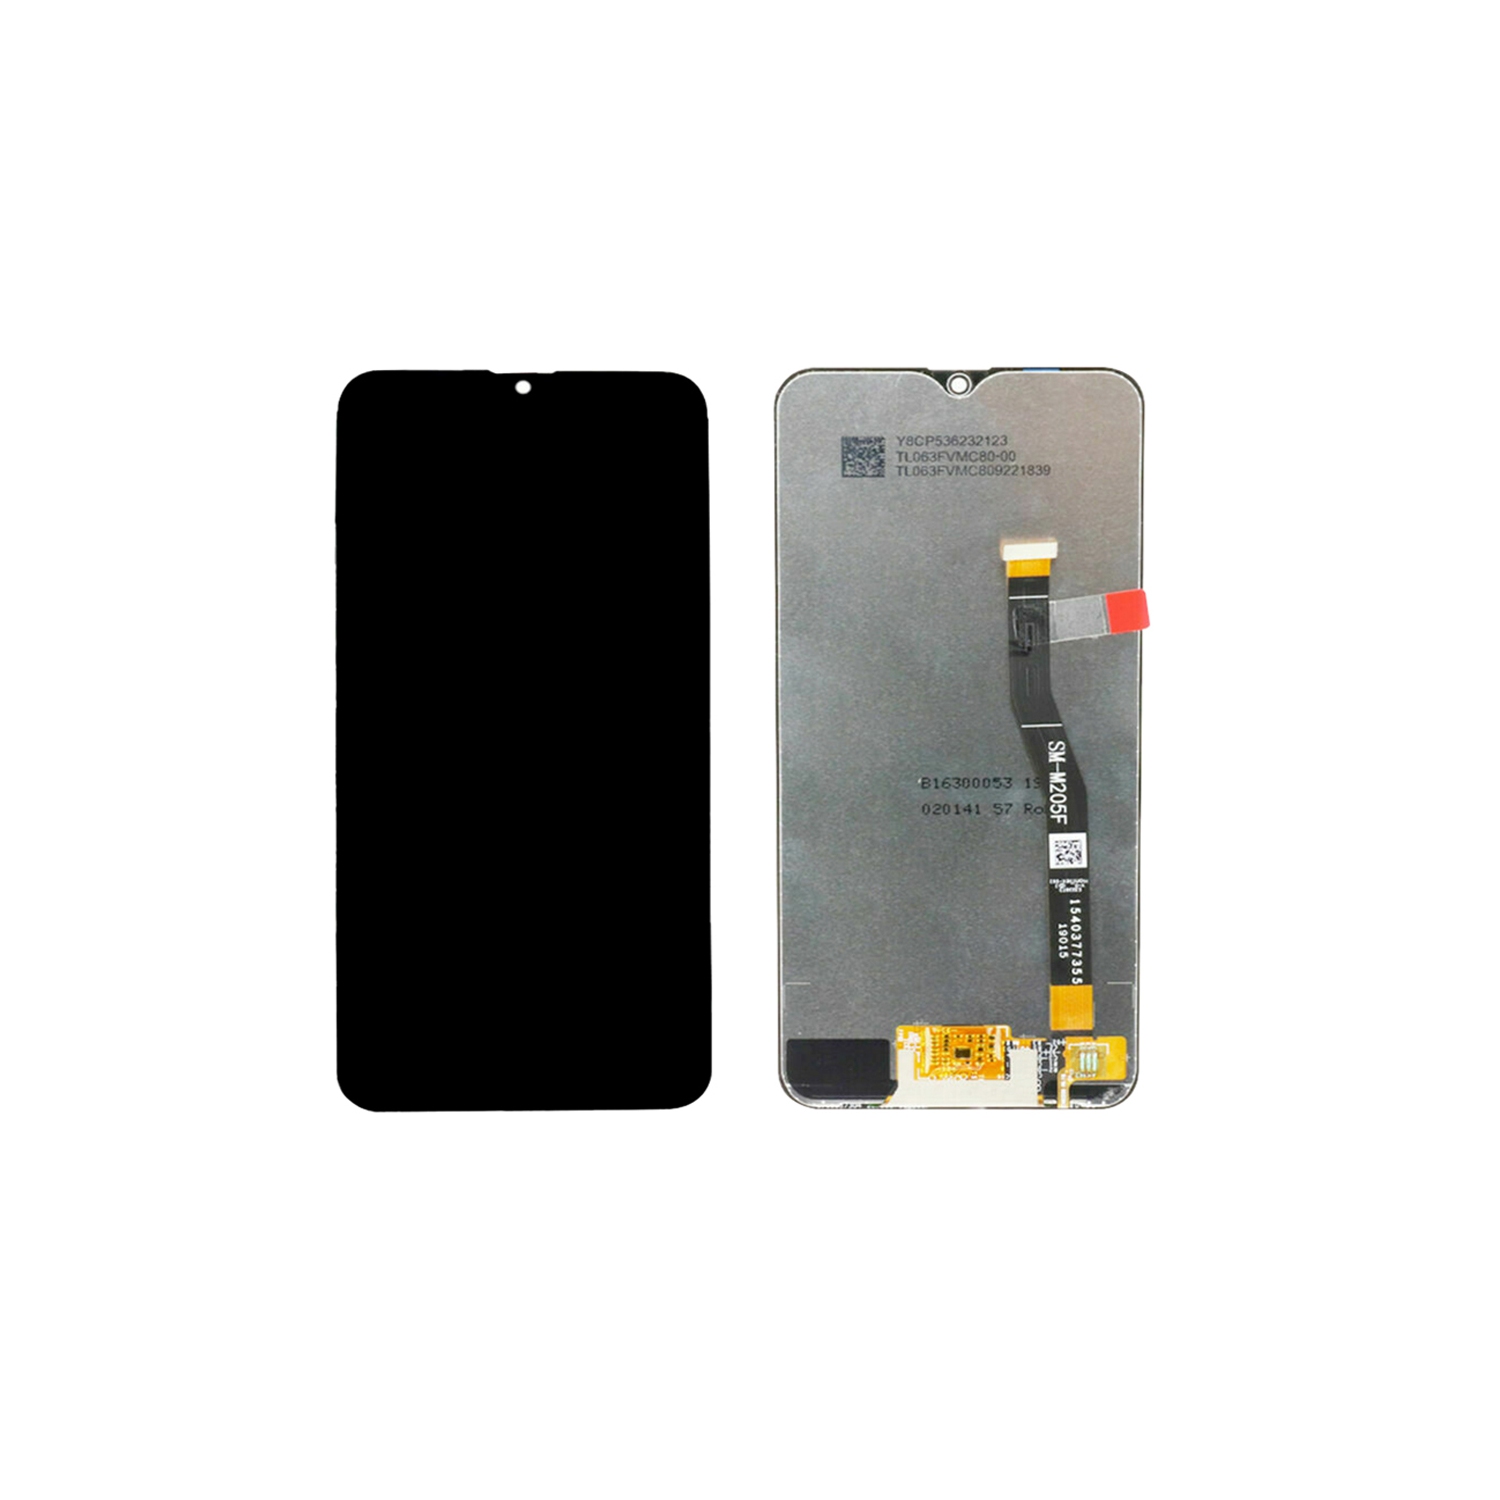 Replacement LCD Display Touch Screen Digitizer Assembly Compatible With Samsung Galaxy M20 - Black